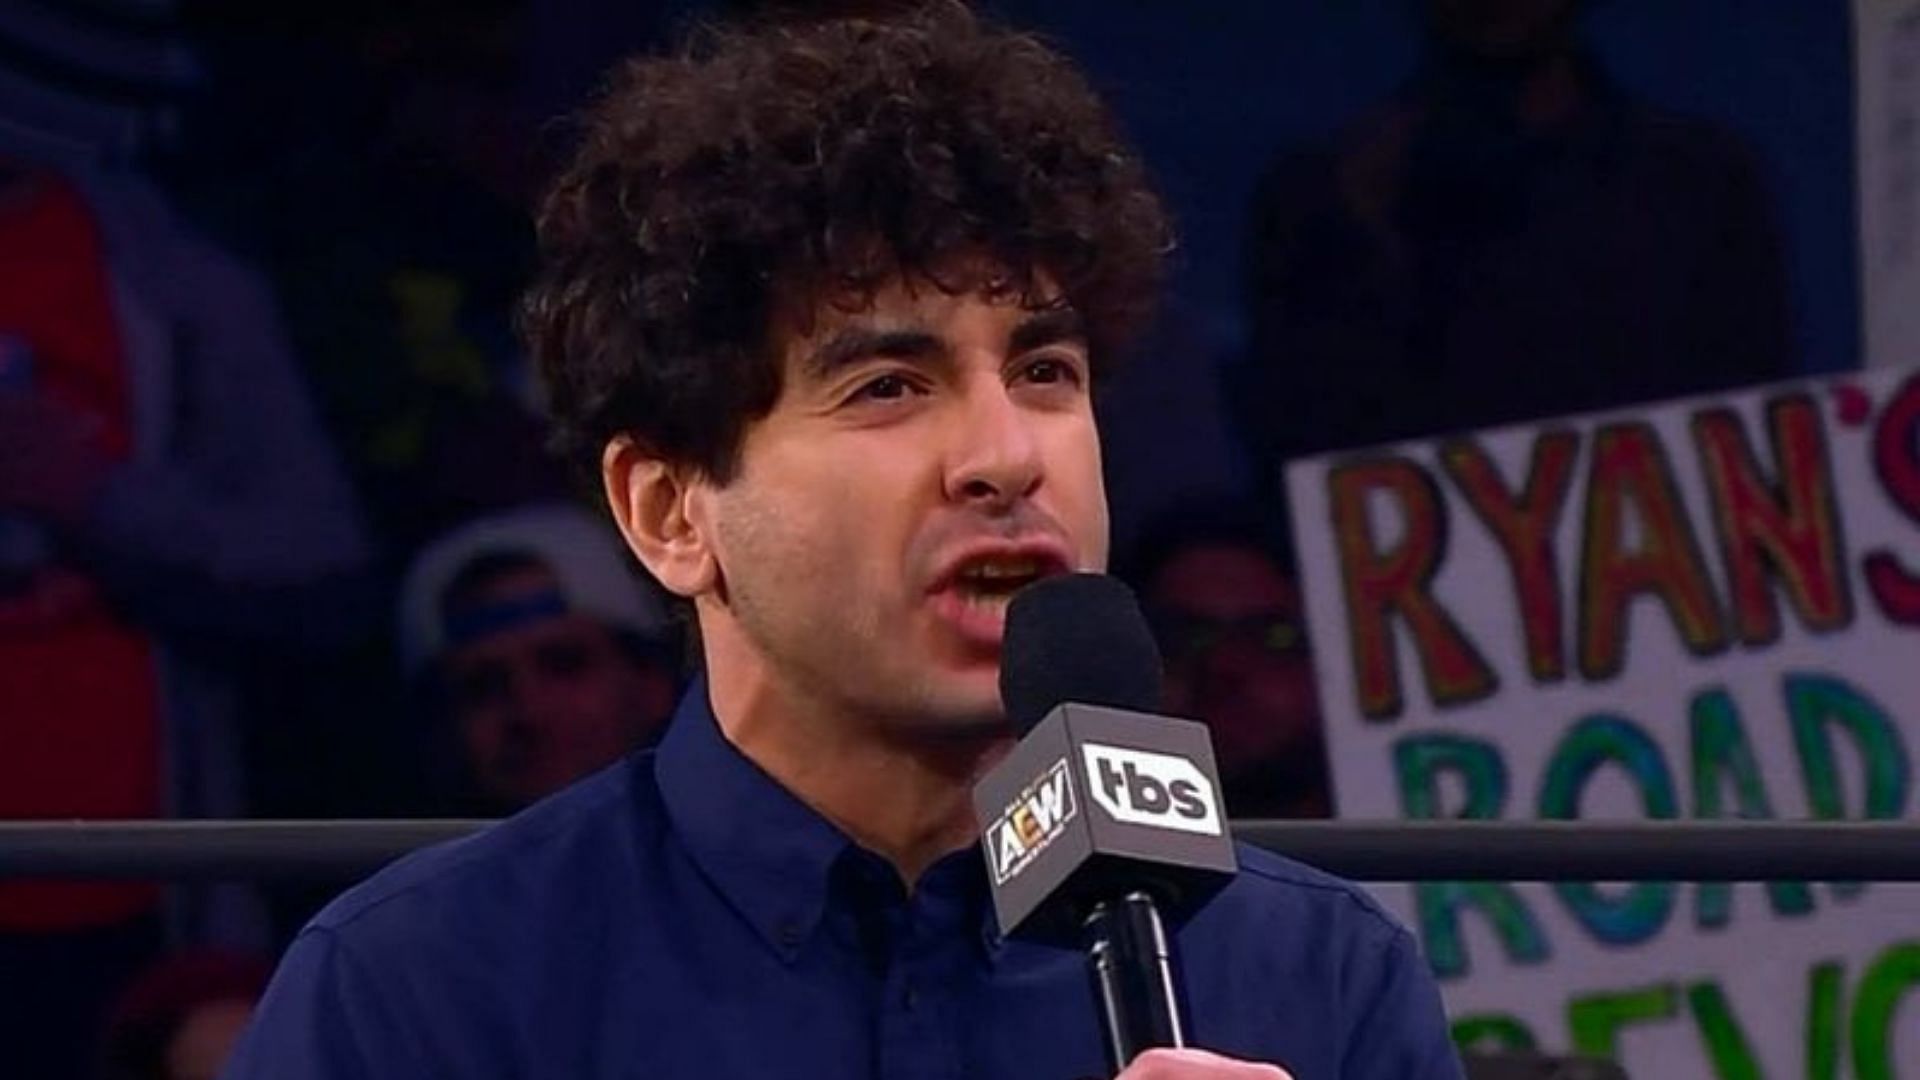 Tony Khan announcing the ROH purchase on AEW Dynamite in 2022